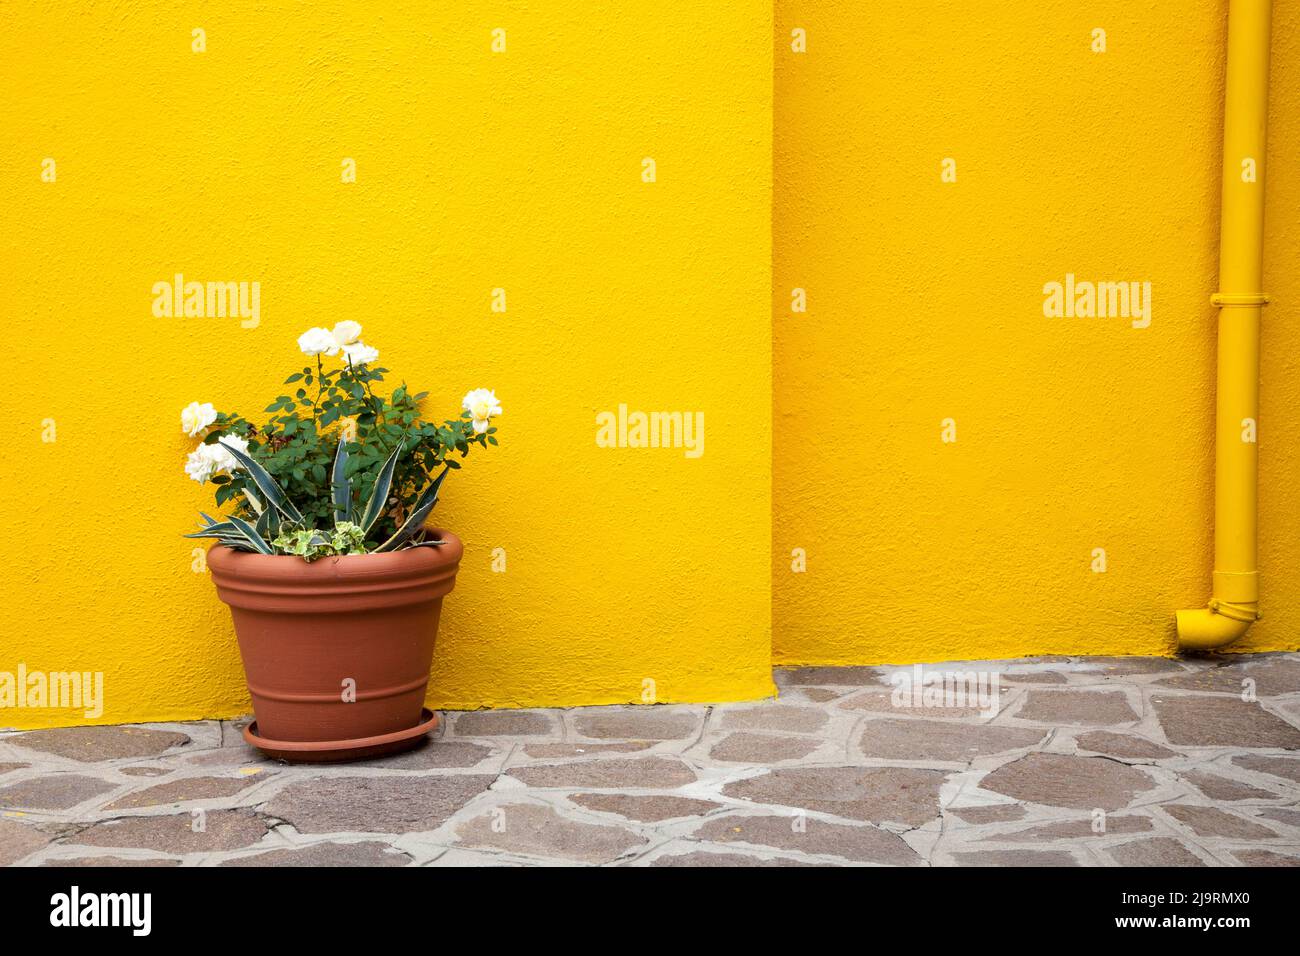 Italy, Venice, Burano Island. Flowerpot against a yellow well on the streets of Burano Island. Stock Photo